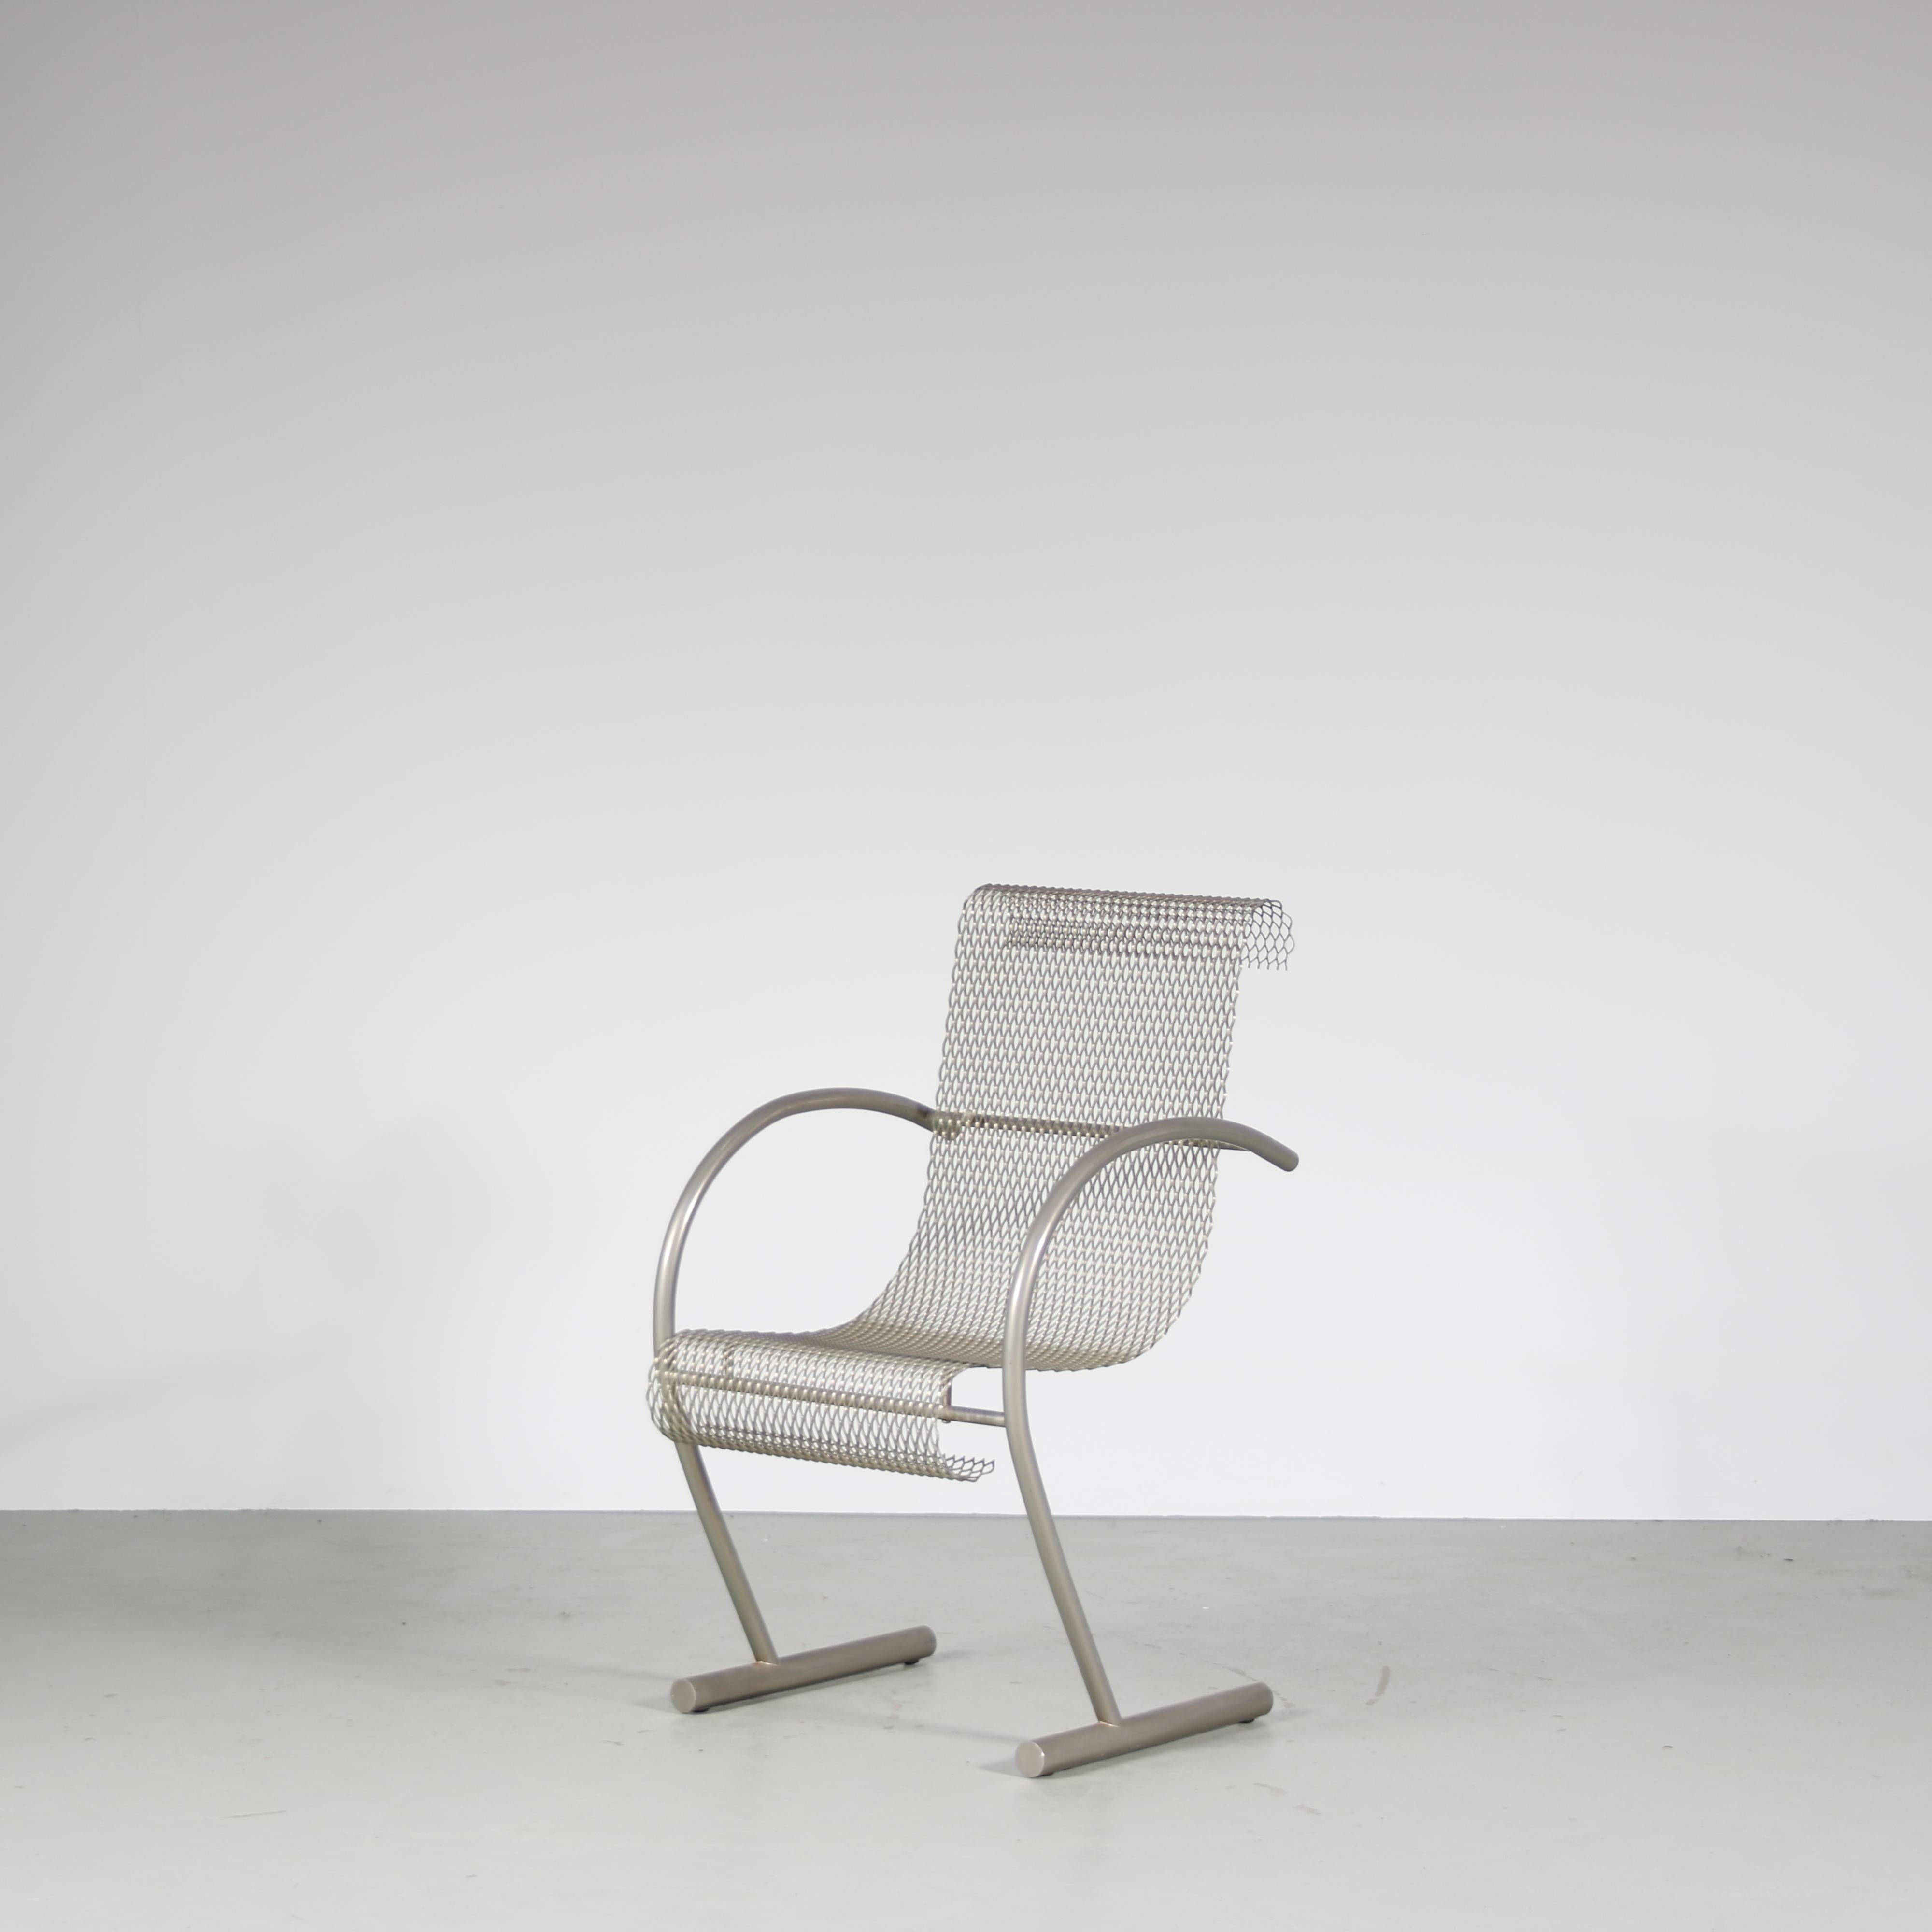 A fantastic “Sing Sing” chair designed by Shiro Kuramata, manufactured by XO in France in the 1980s.

This exceptional chair features a distinctive, architectural form that captures the eye and complements any modern interior. Made of high quality